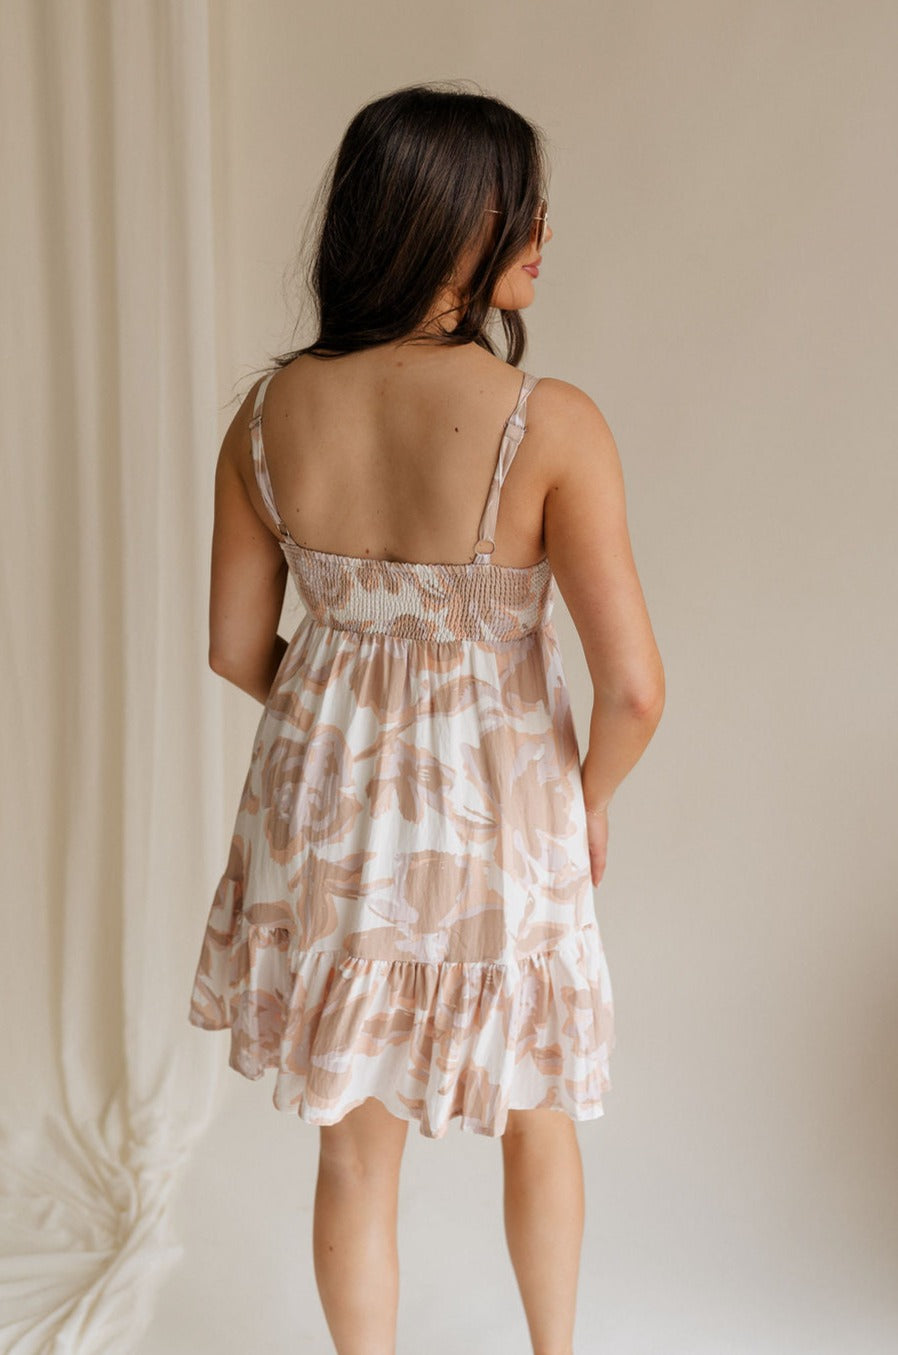 Back view of female model wearing the Shelby Floral Sleeveless Mini Dress that has ivory fabric with peach and taupe floral print, sleeveless body, and a straight neckline.